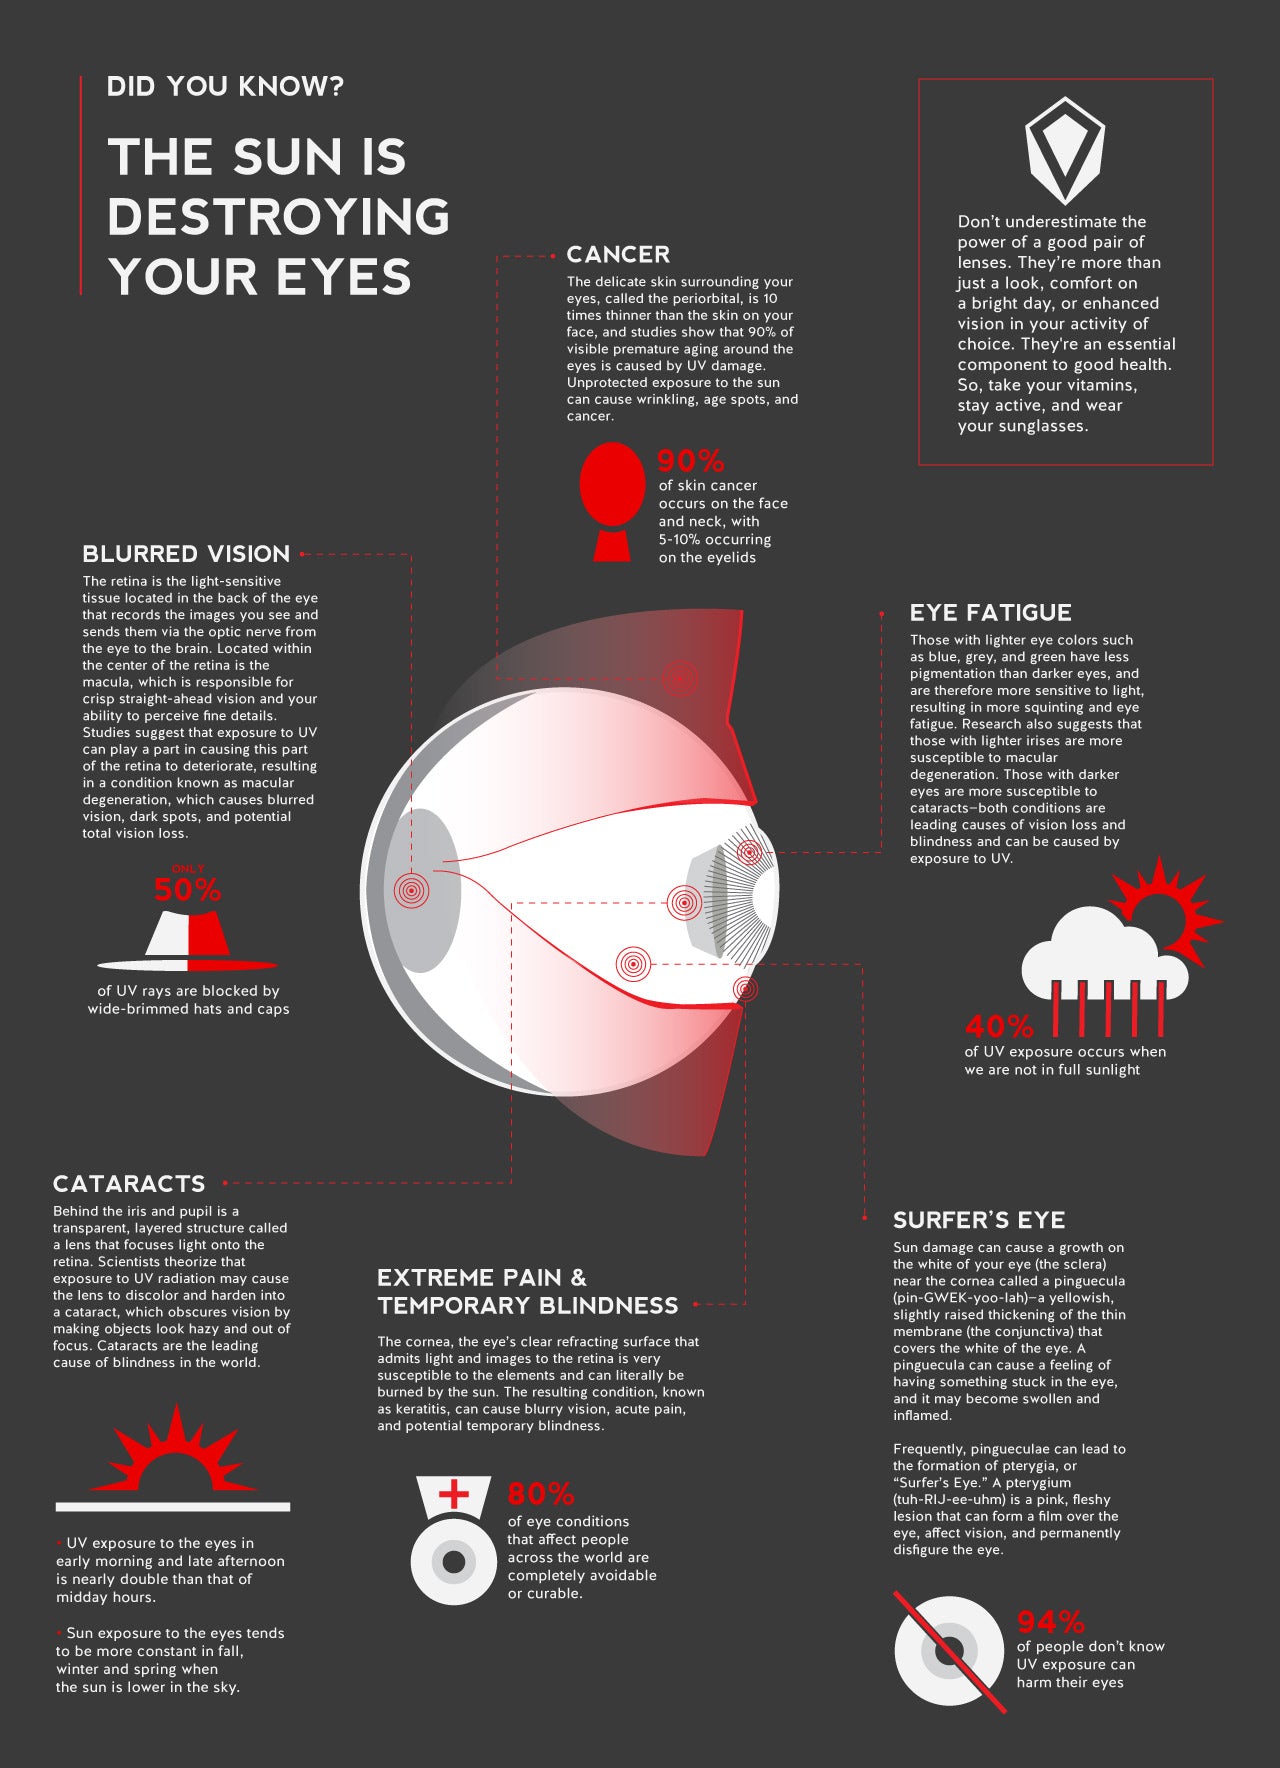 Did you know? The sun is destroying your eyes infographic